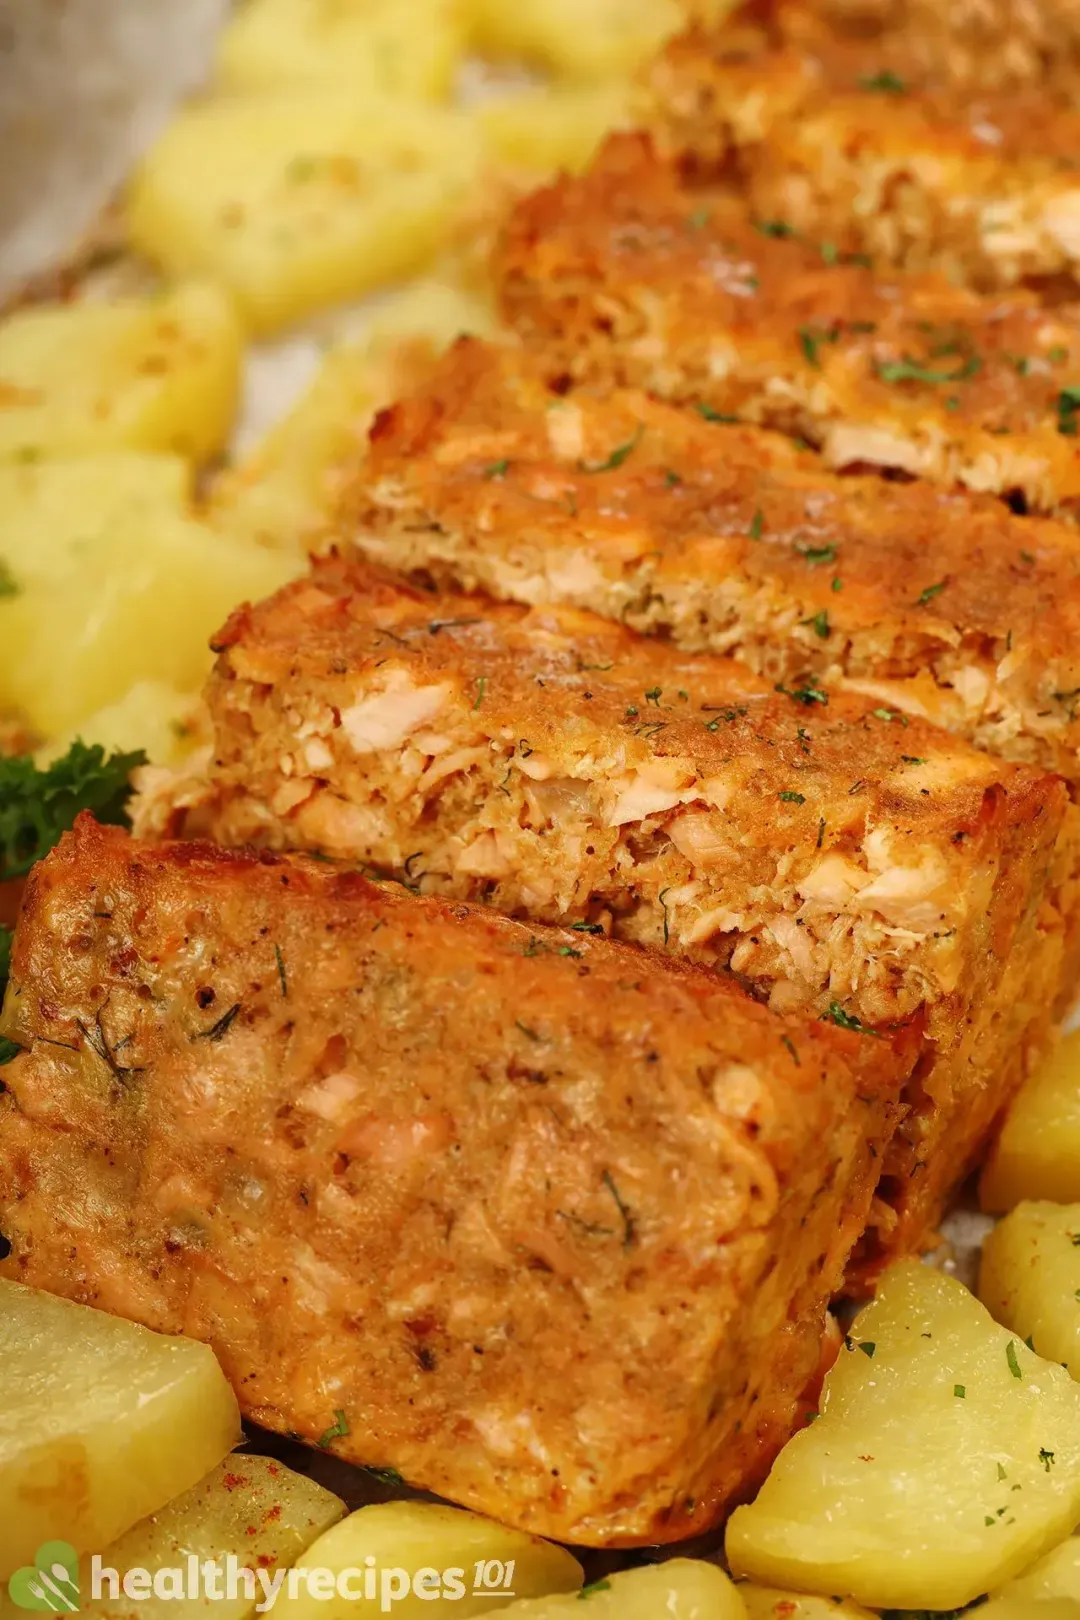 Salmon cakes baked to golden perfection and covered in potato cubes